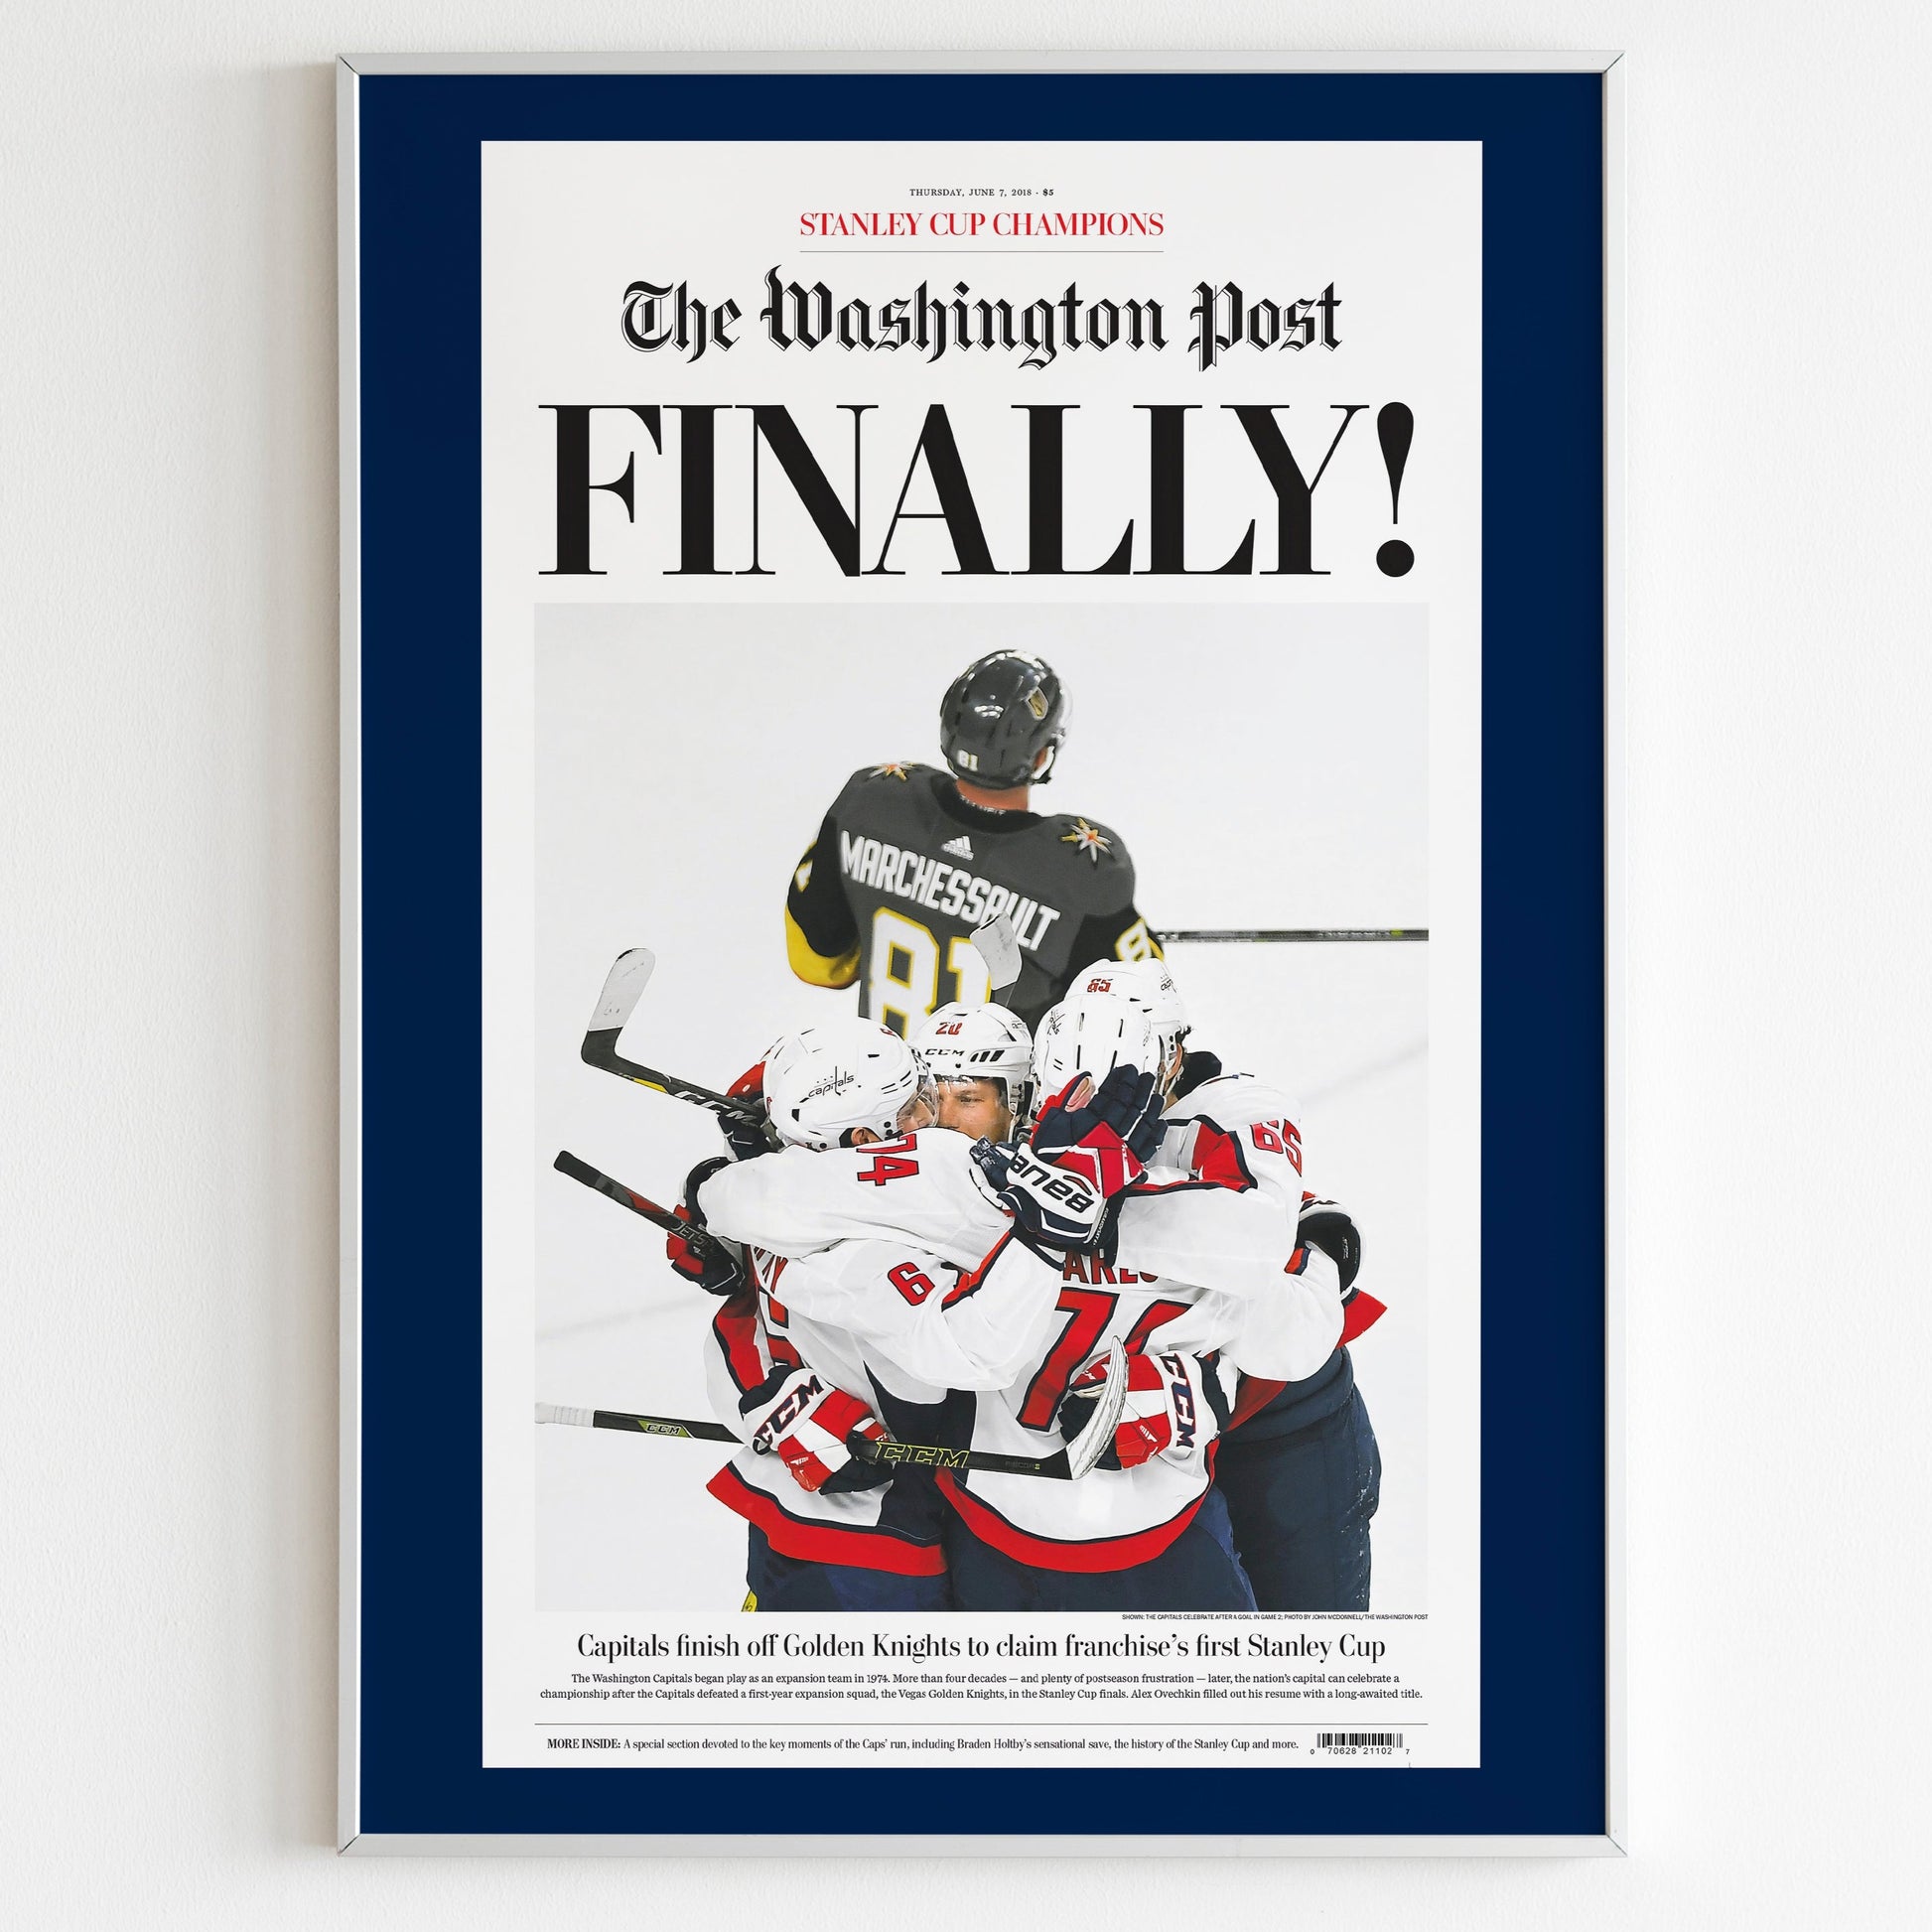 Washington Capitals 2018 NHL Stanley Cup Champions Front Cover The Washington Post Poster, Newspaper Front Page, Hockey USA Team Magazine